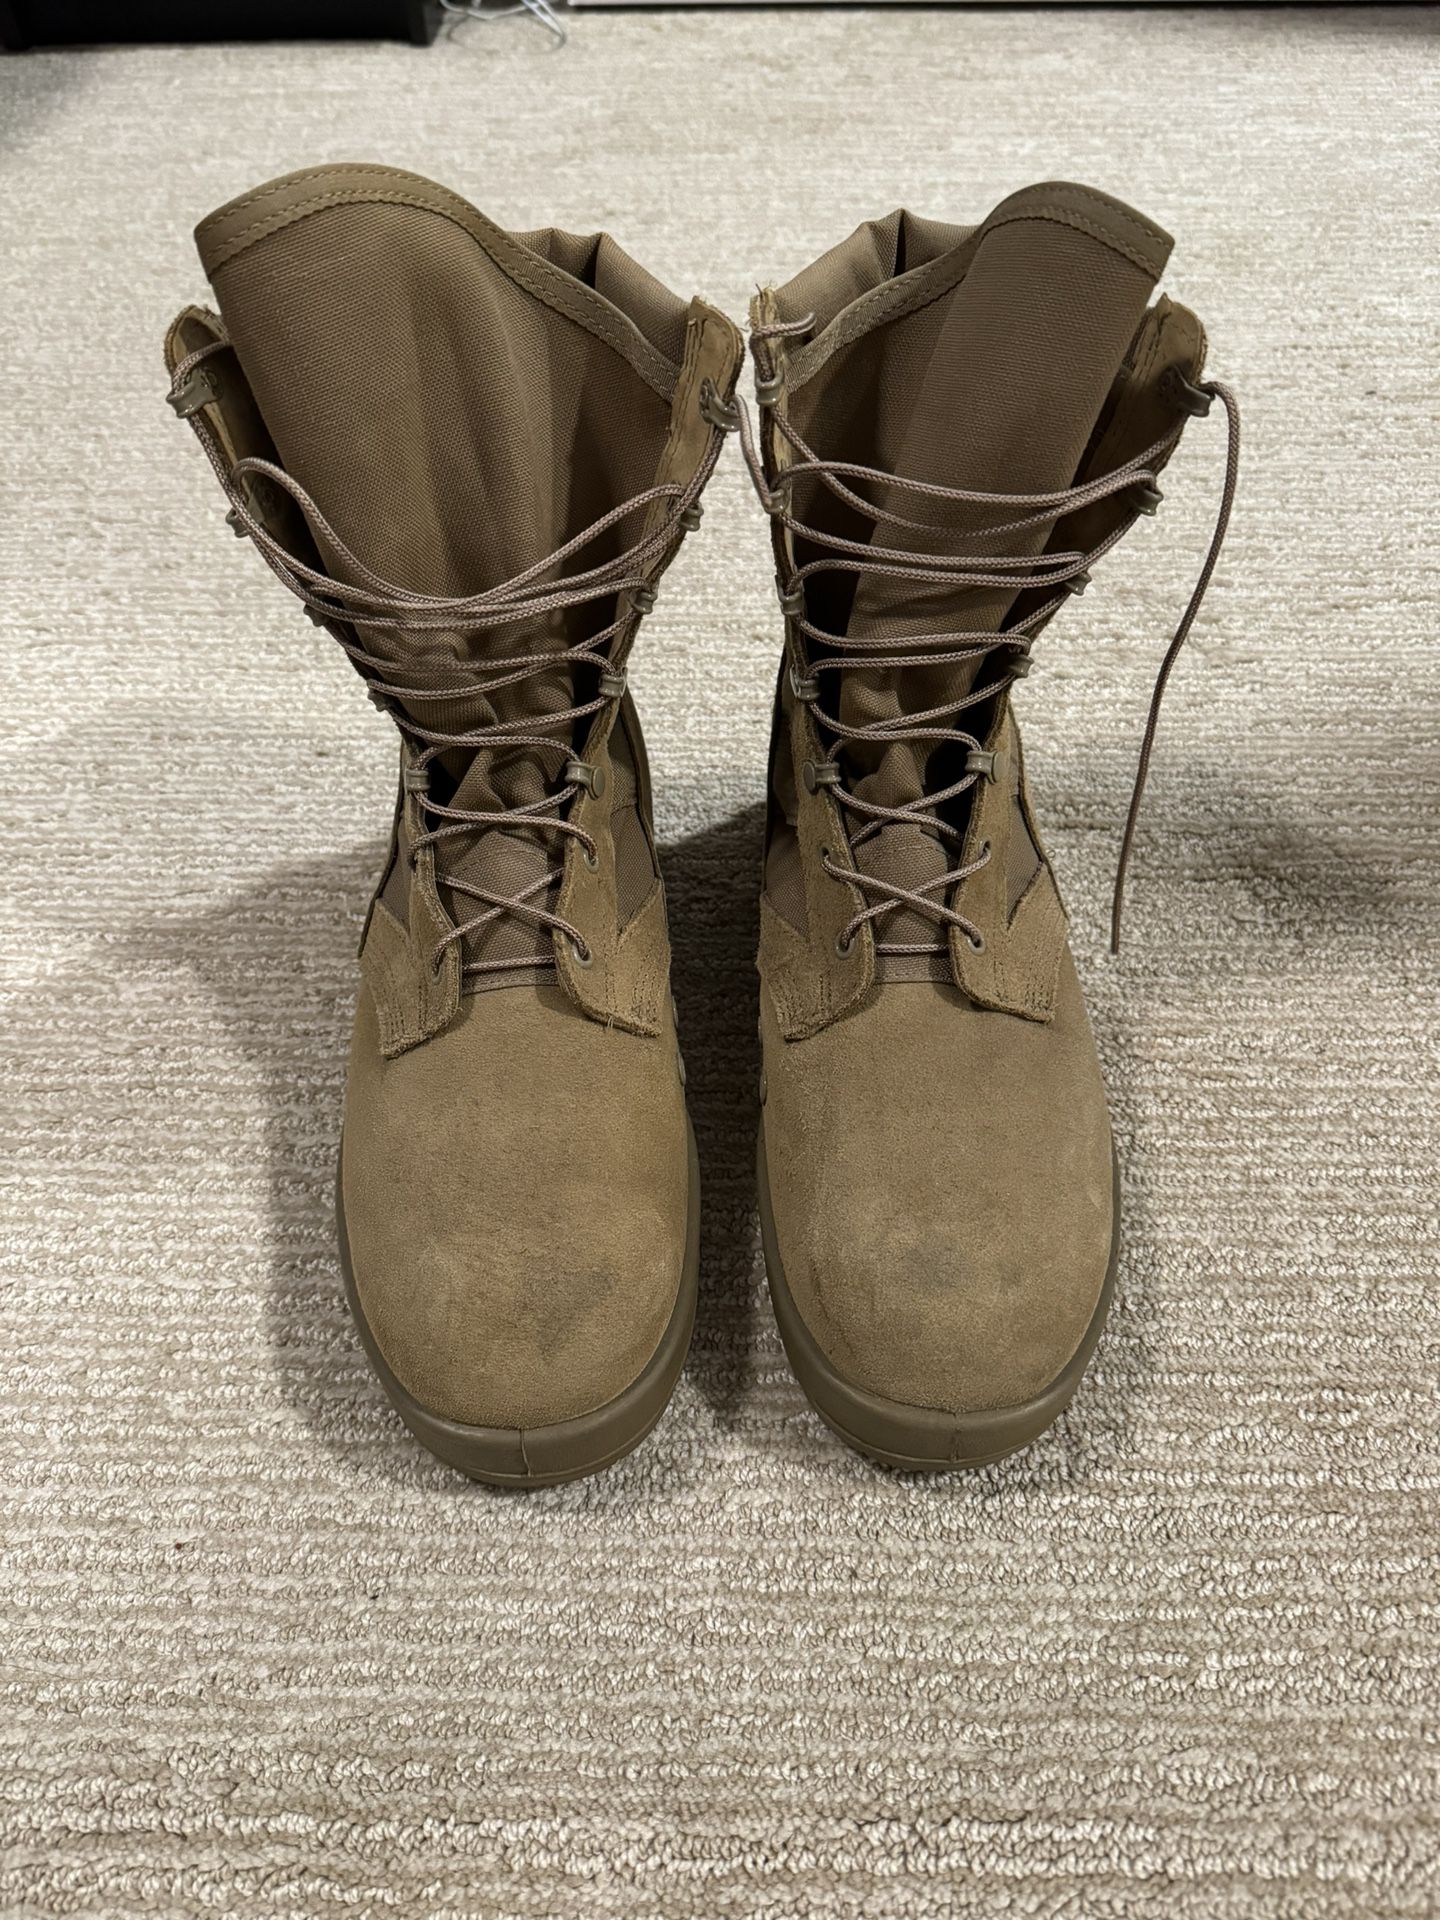 Military Steel Toe Boots 10.5W